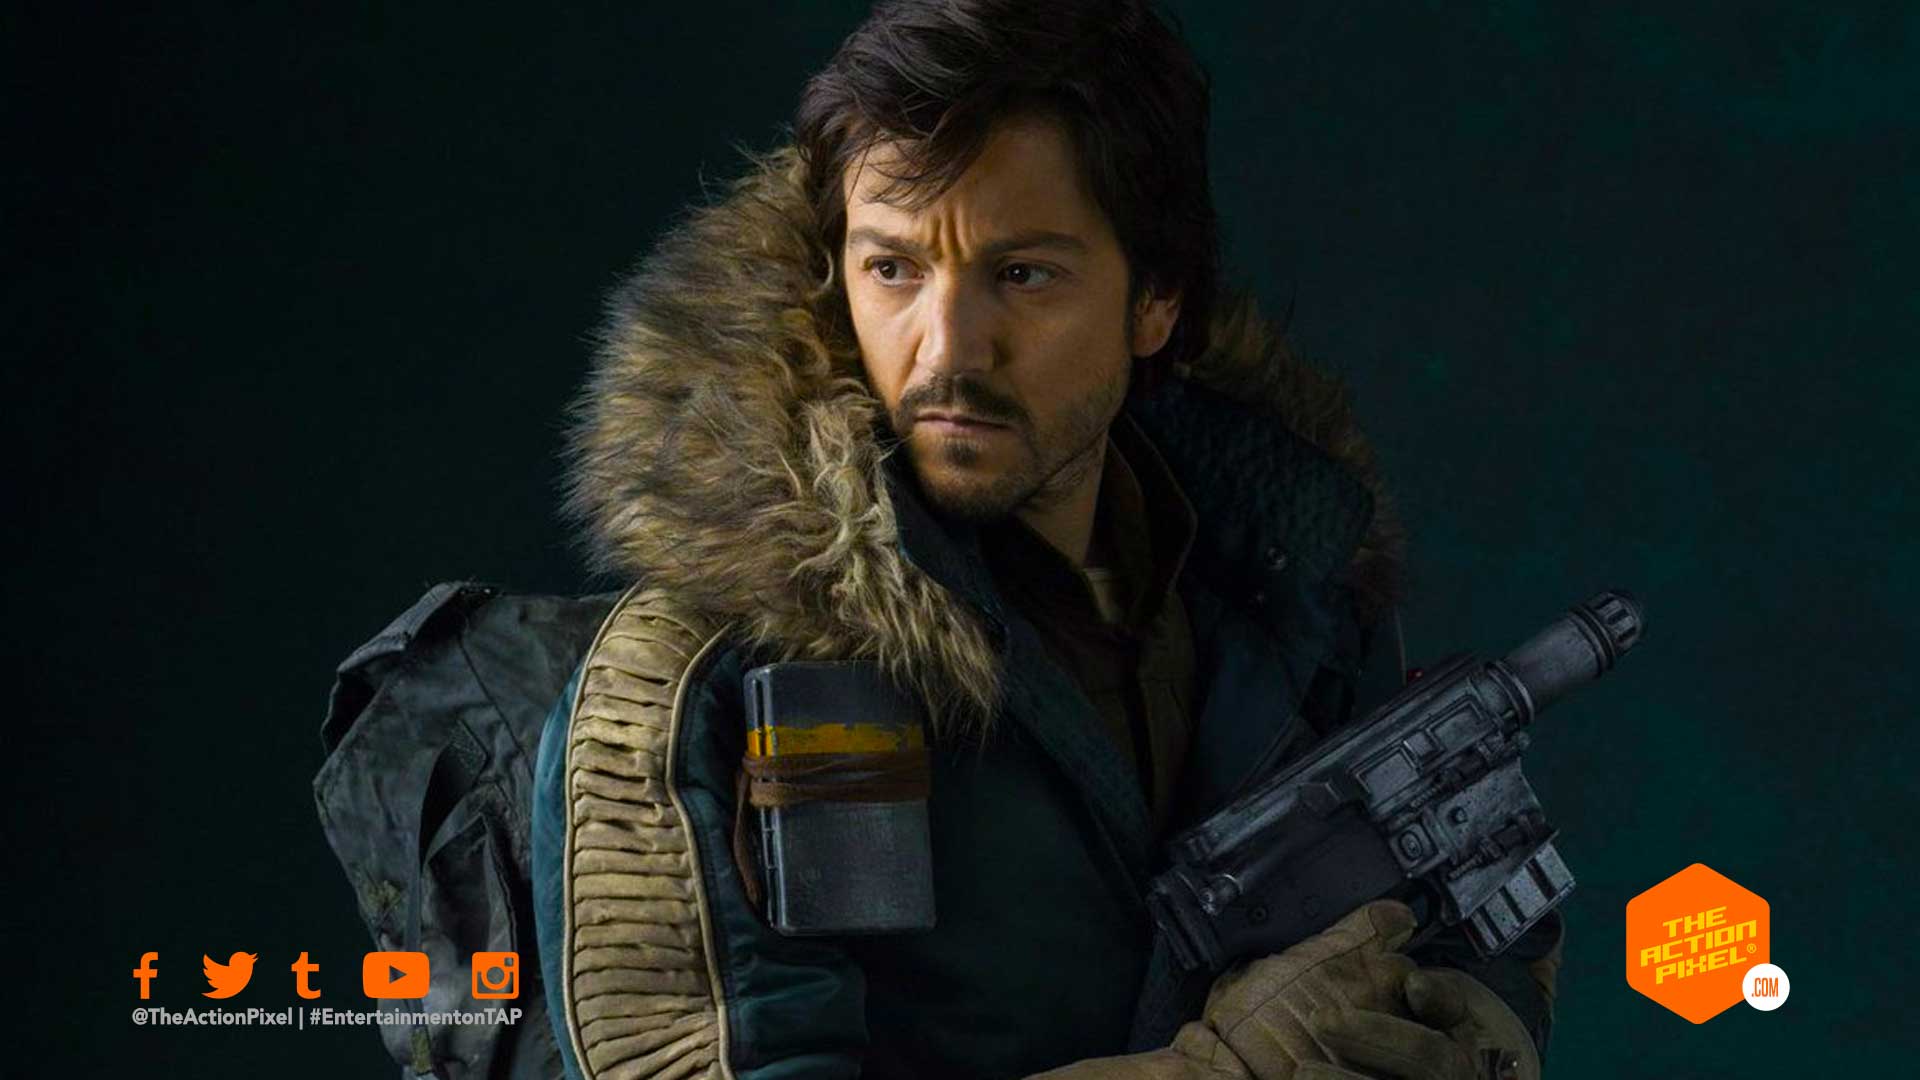 diego luna, star wars, disney+ cassian andor, rogue one, rogue one prequel tv series, rogue one prequel, rogue on disney+ tv series, rogue one: a star wars story, rogue one: a star wars story prequel, featured, entertainment on tap, the action pixel